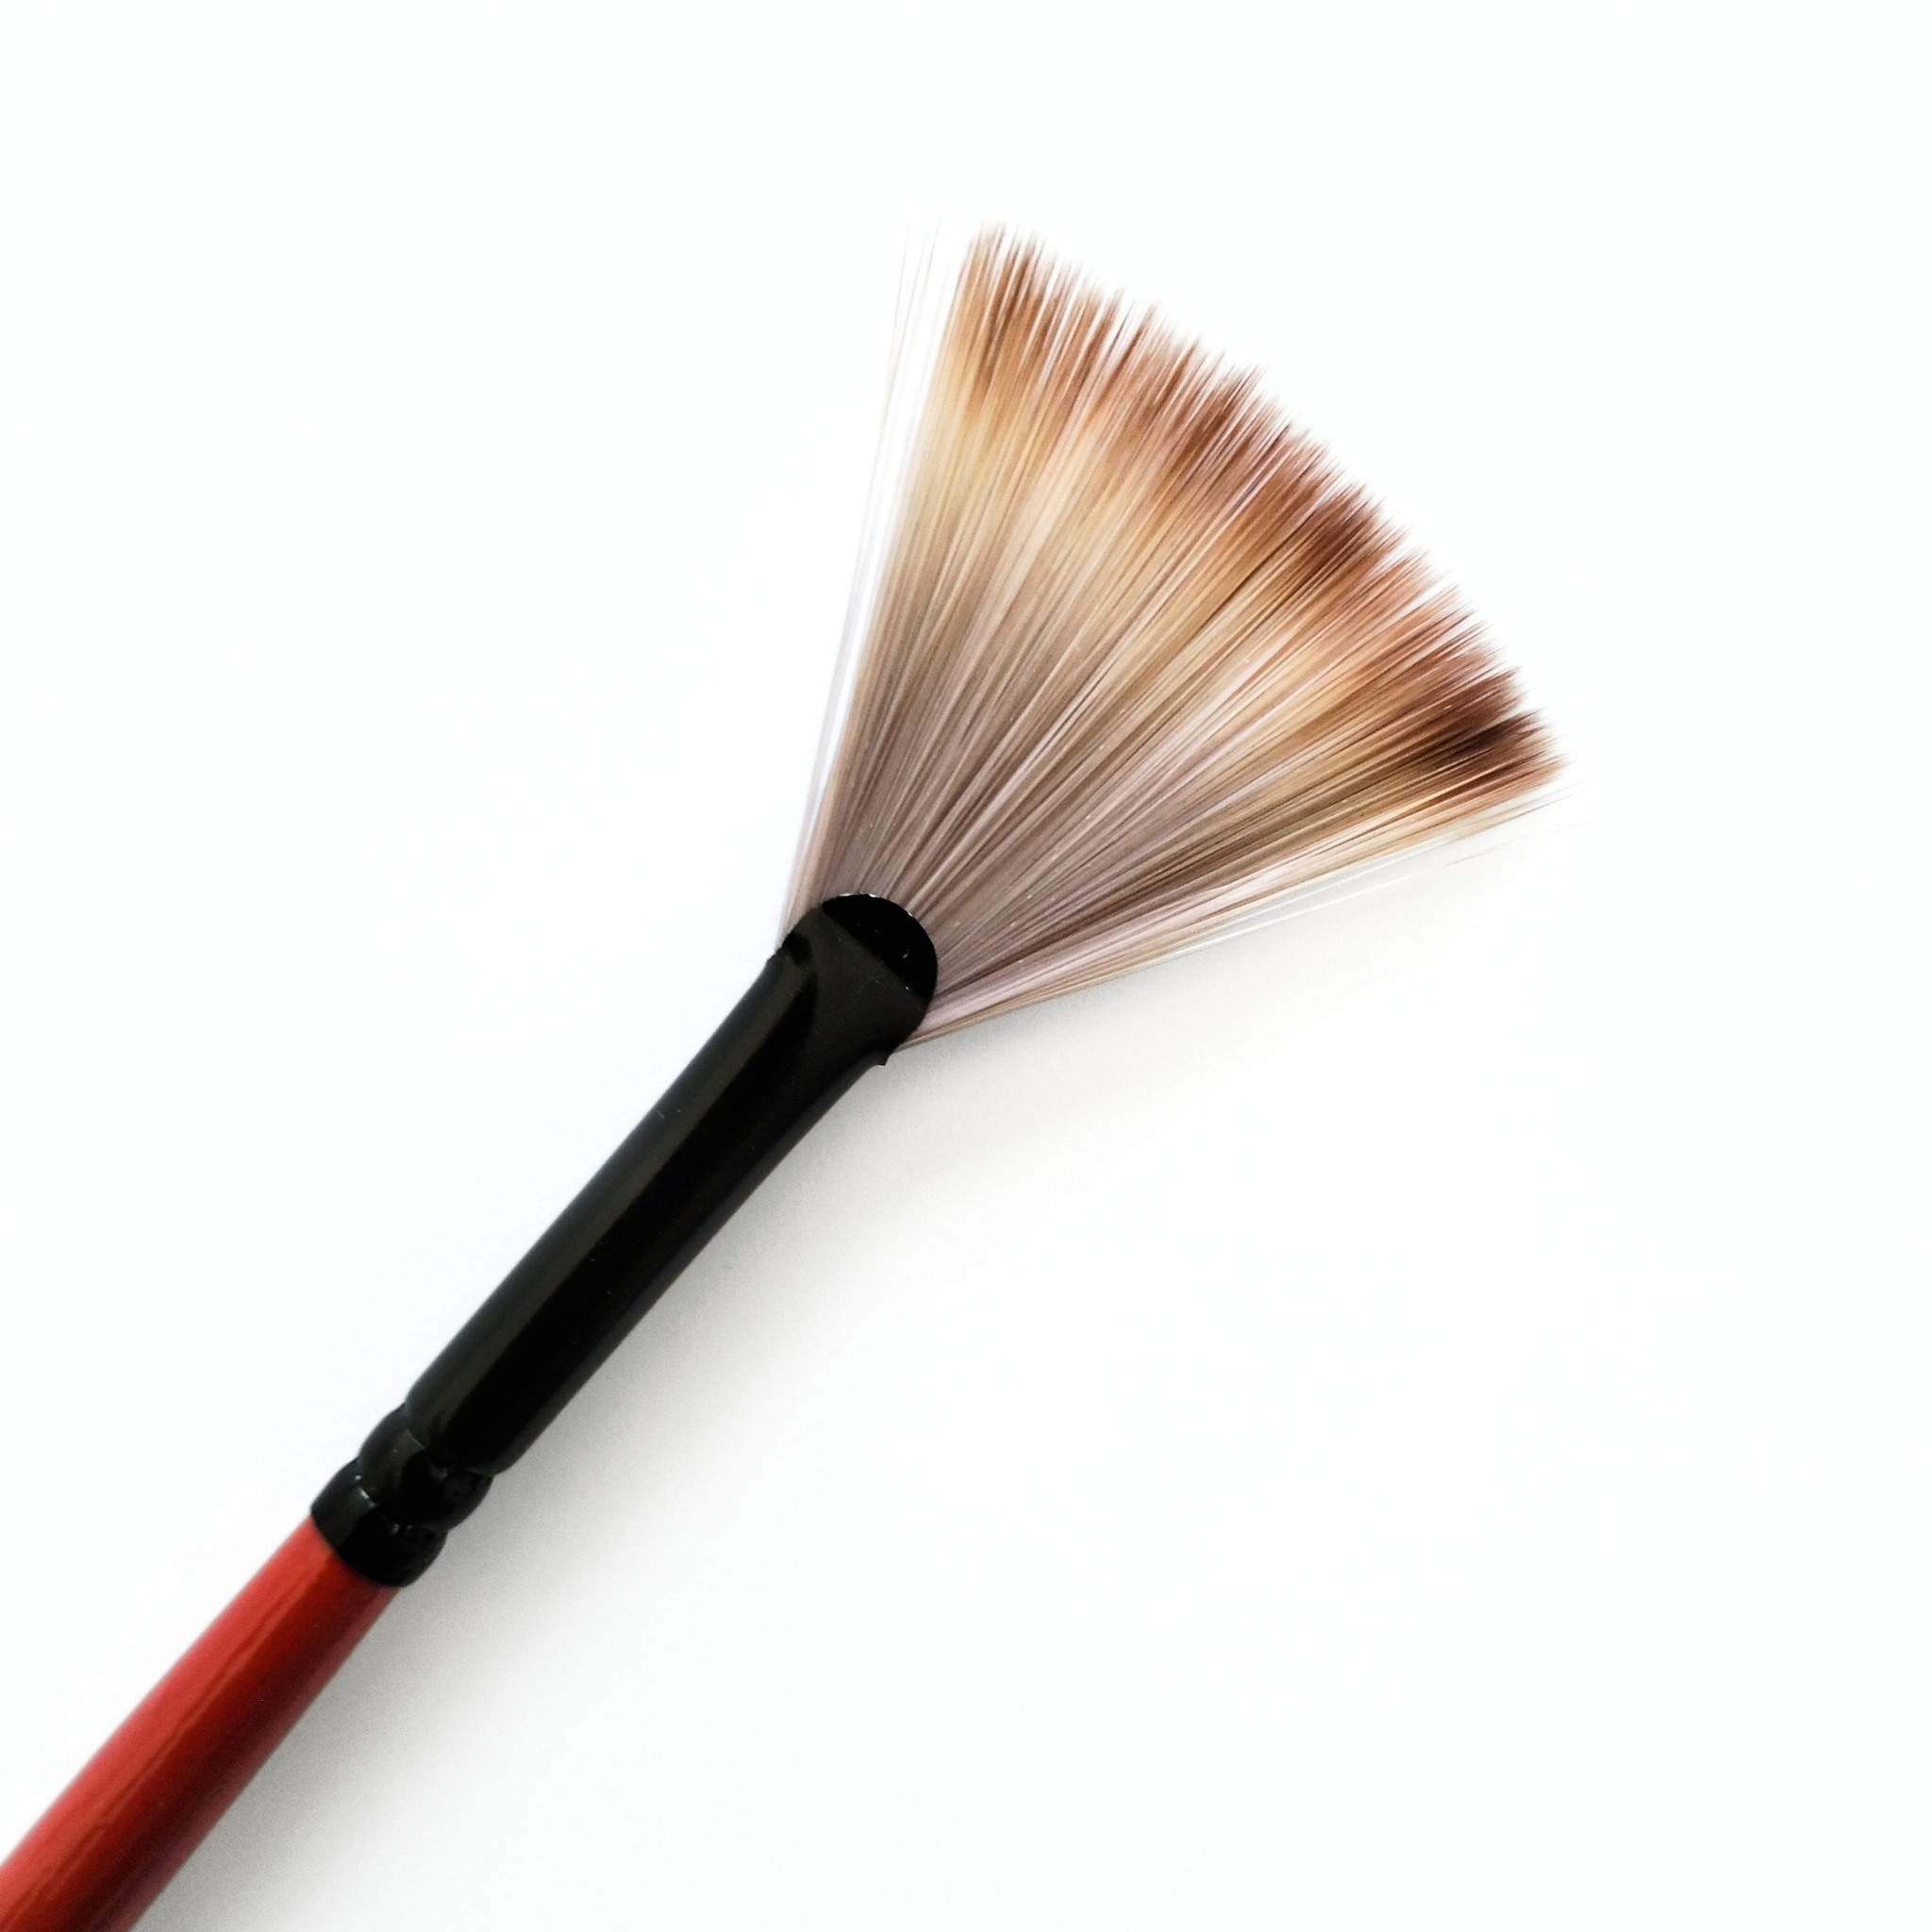 A fan brush for painting in different colors, coloring and crafting Cherkov  art and creation